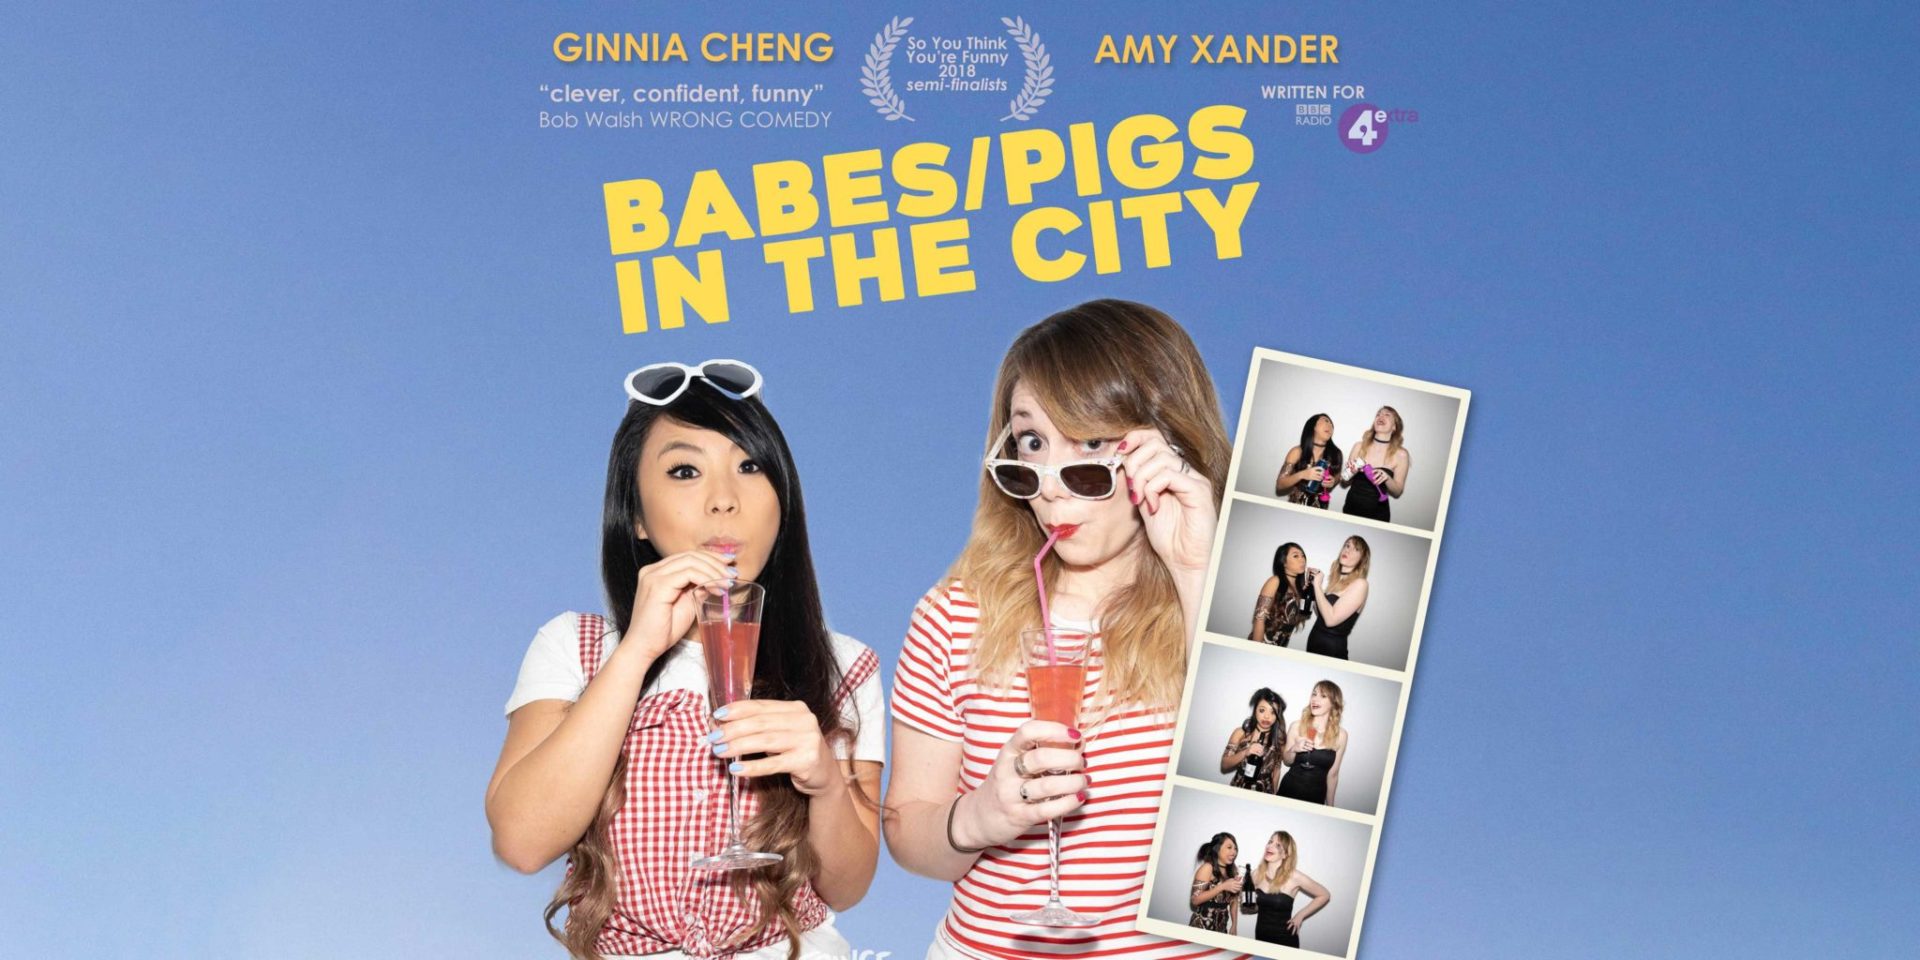 Ginnia Cheng & Amy Xander: 'Babes/Pigs in the City' Brighton Fringe Festival 2019